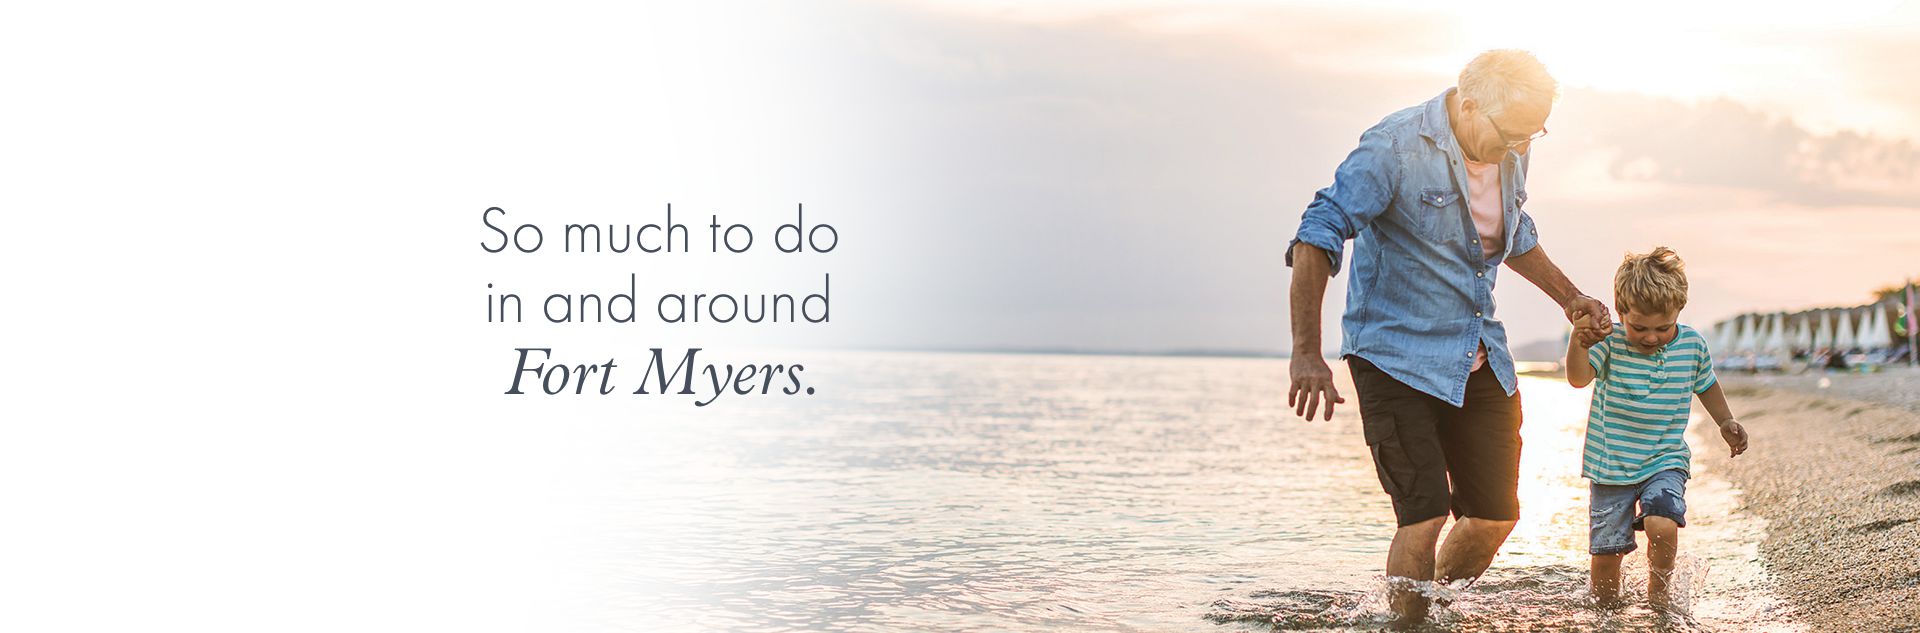 So much to do  in and around  Fort Myers.